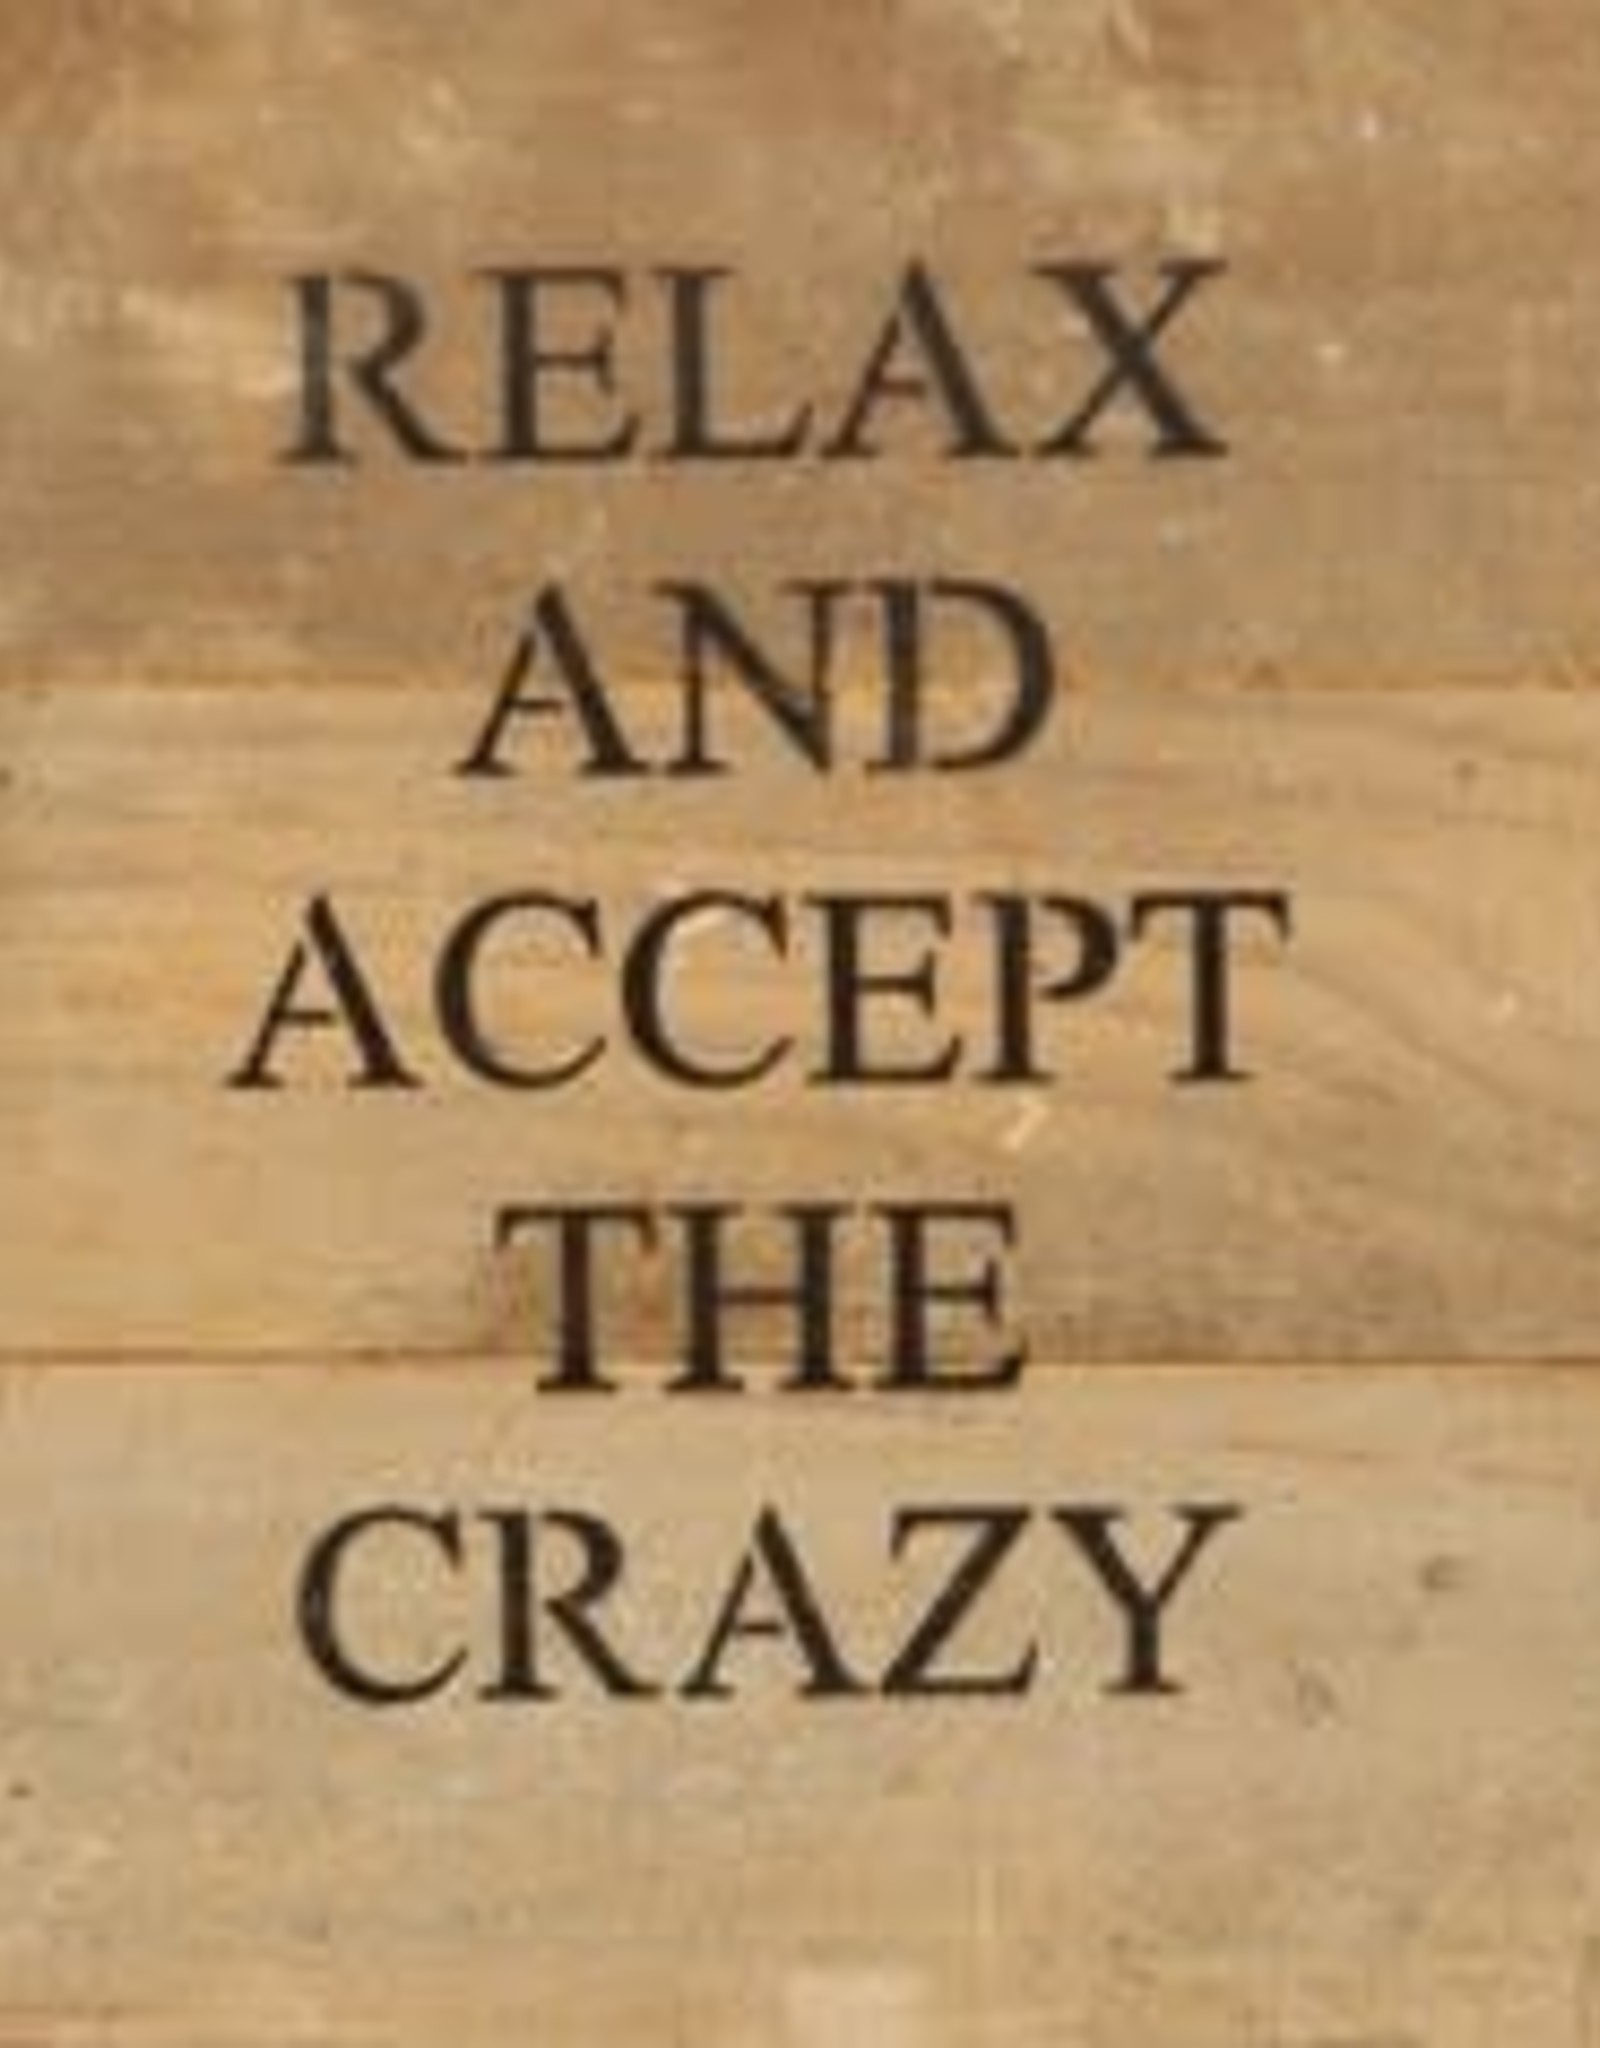 Relax and Accept the crazy - wood sign